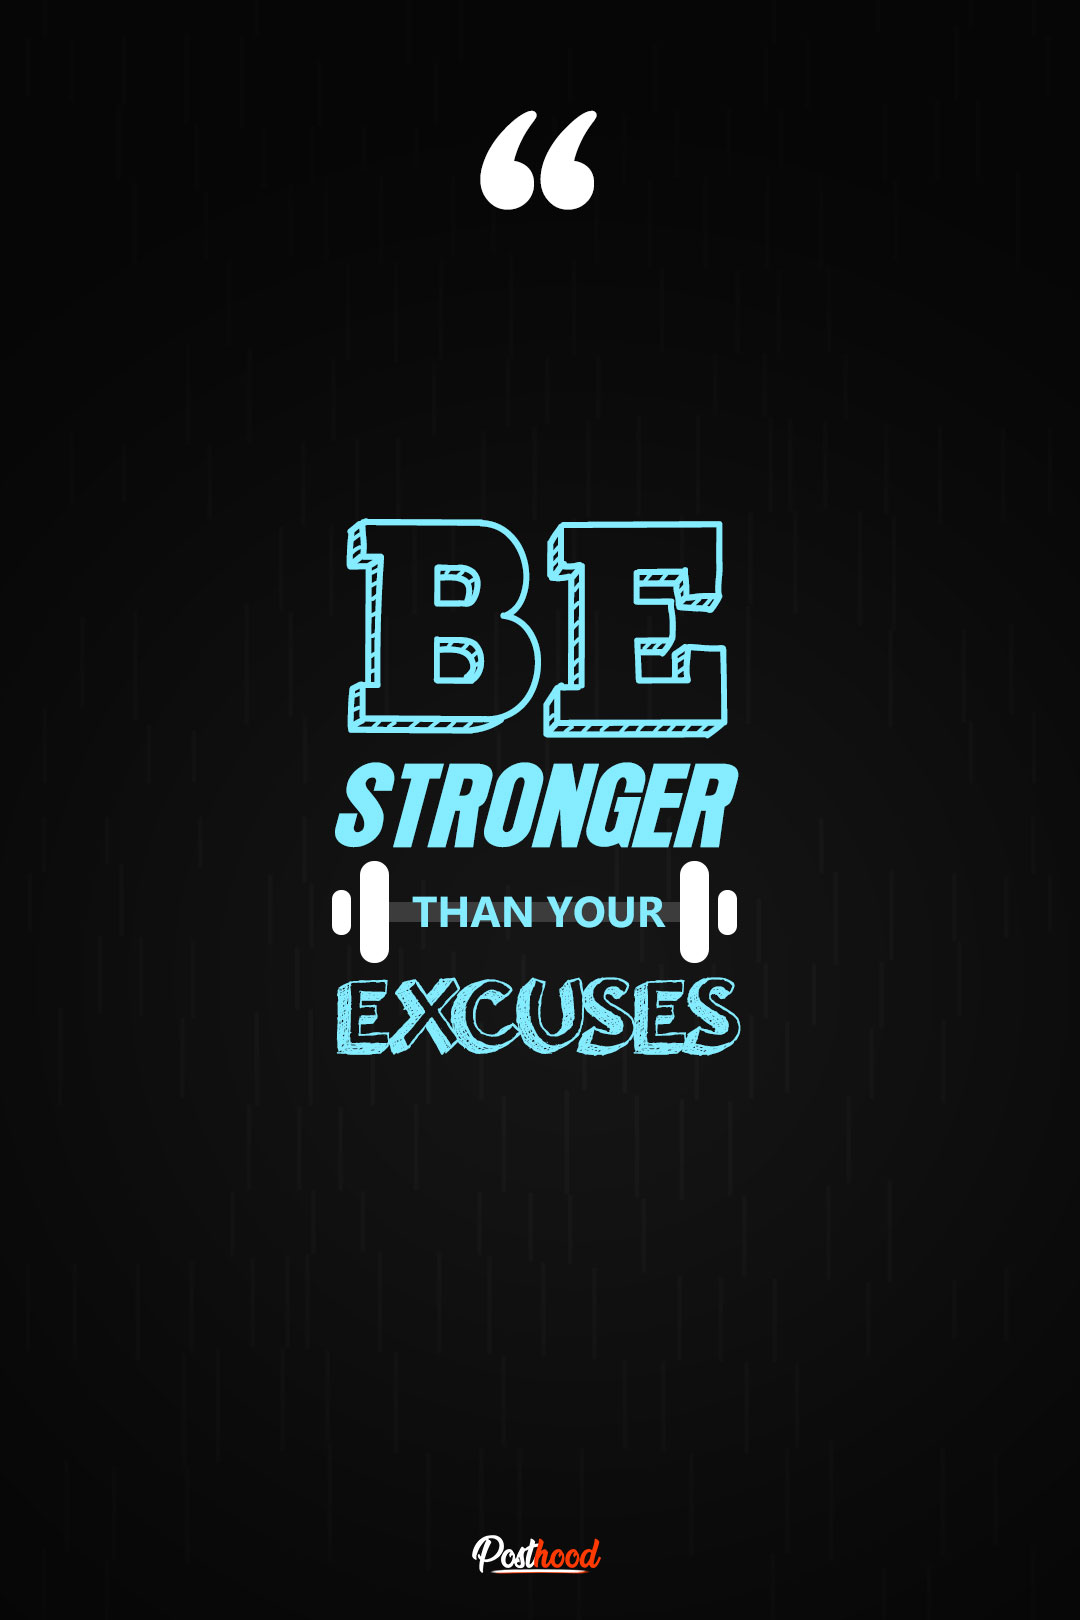 Fitness motivational quotes for your phone wallpaper